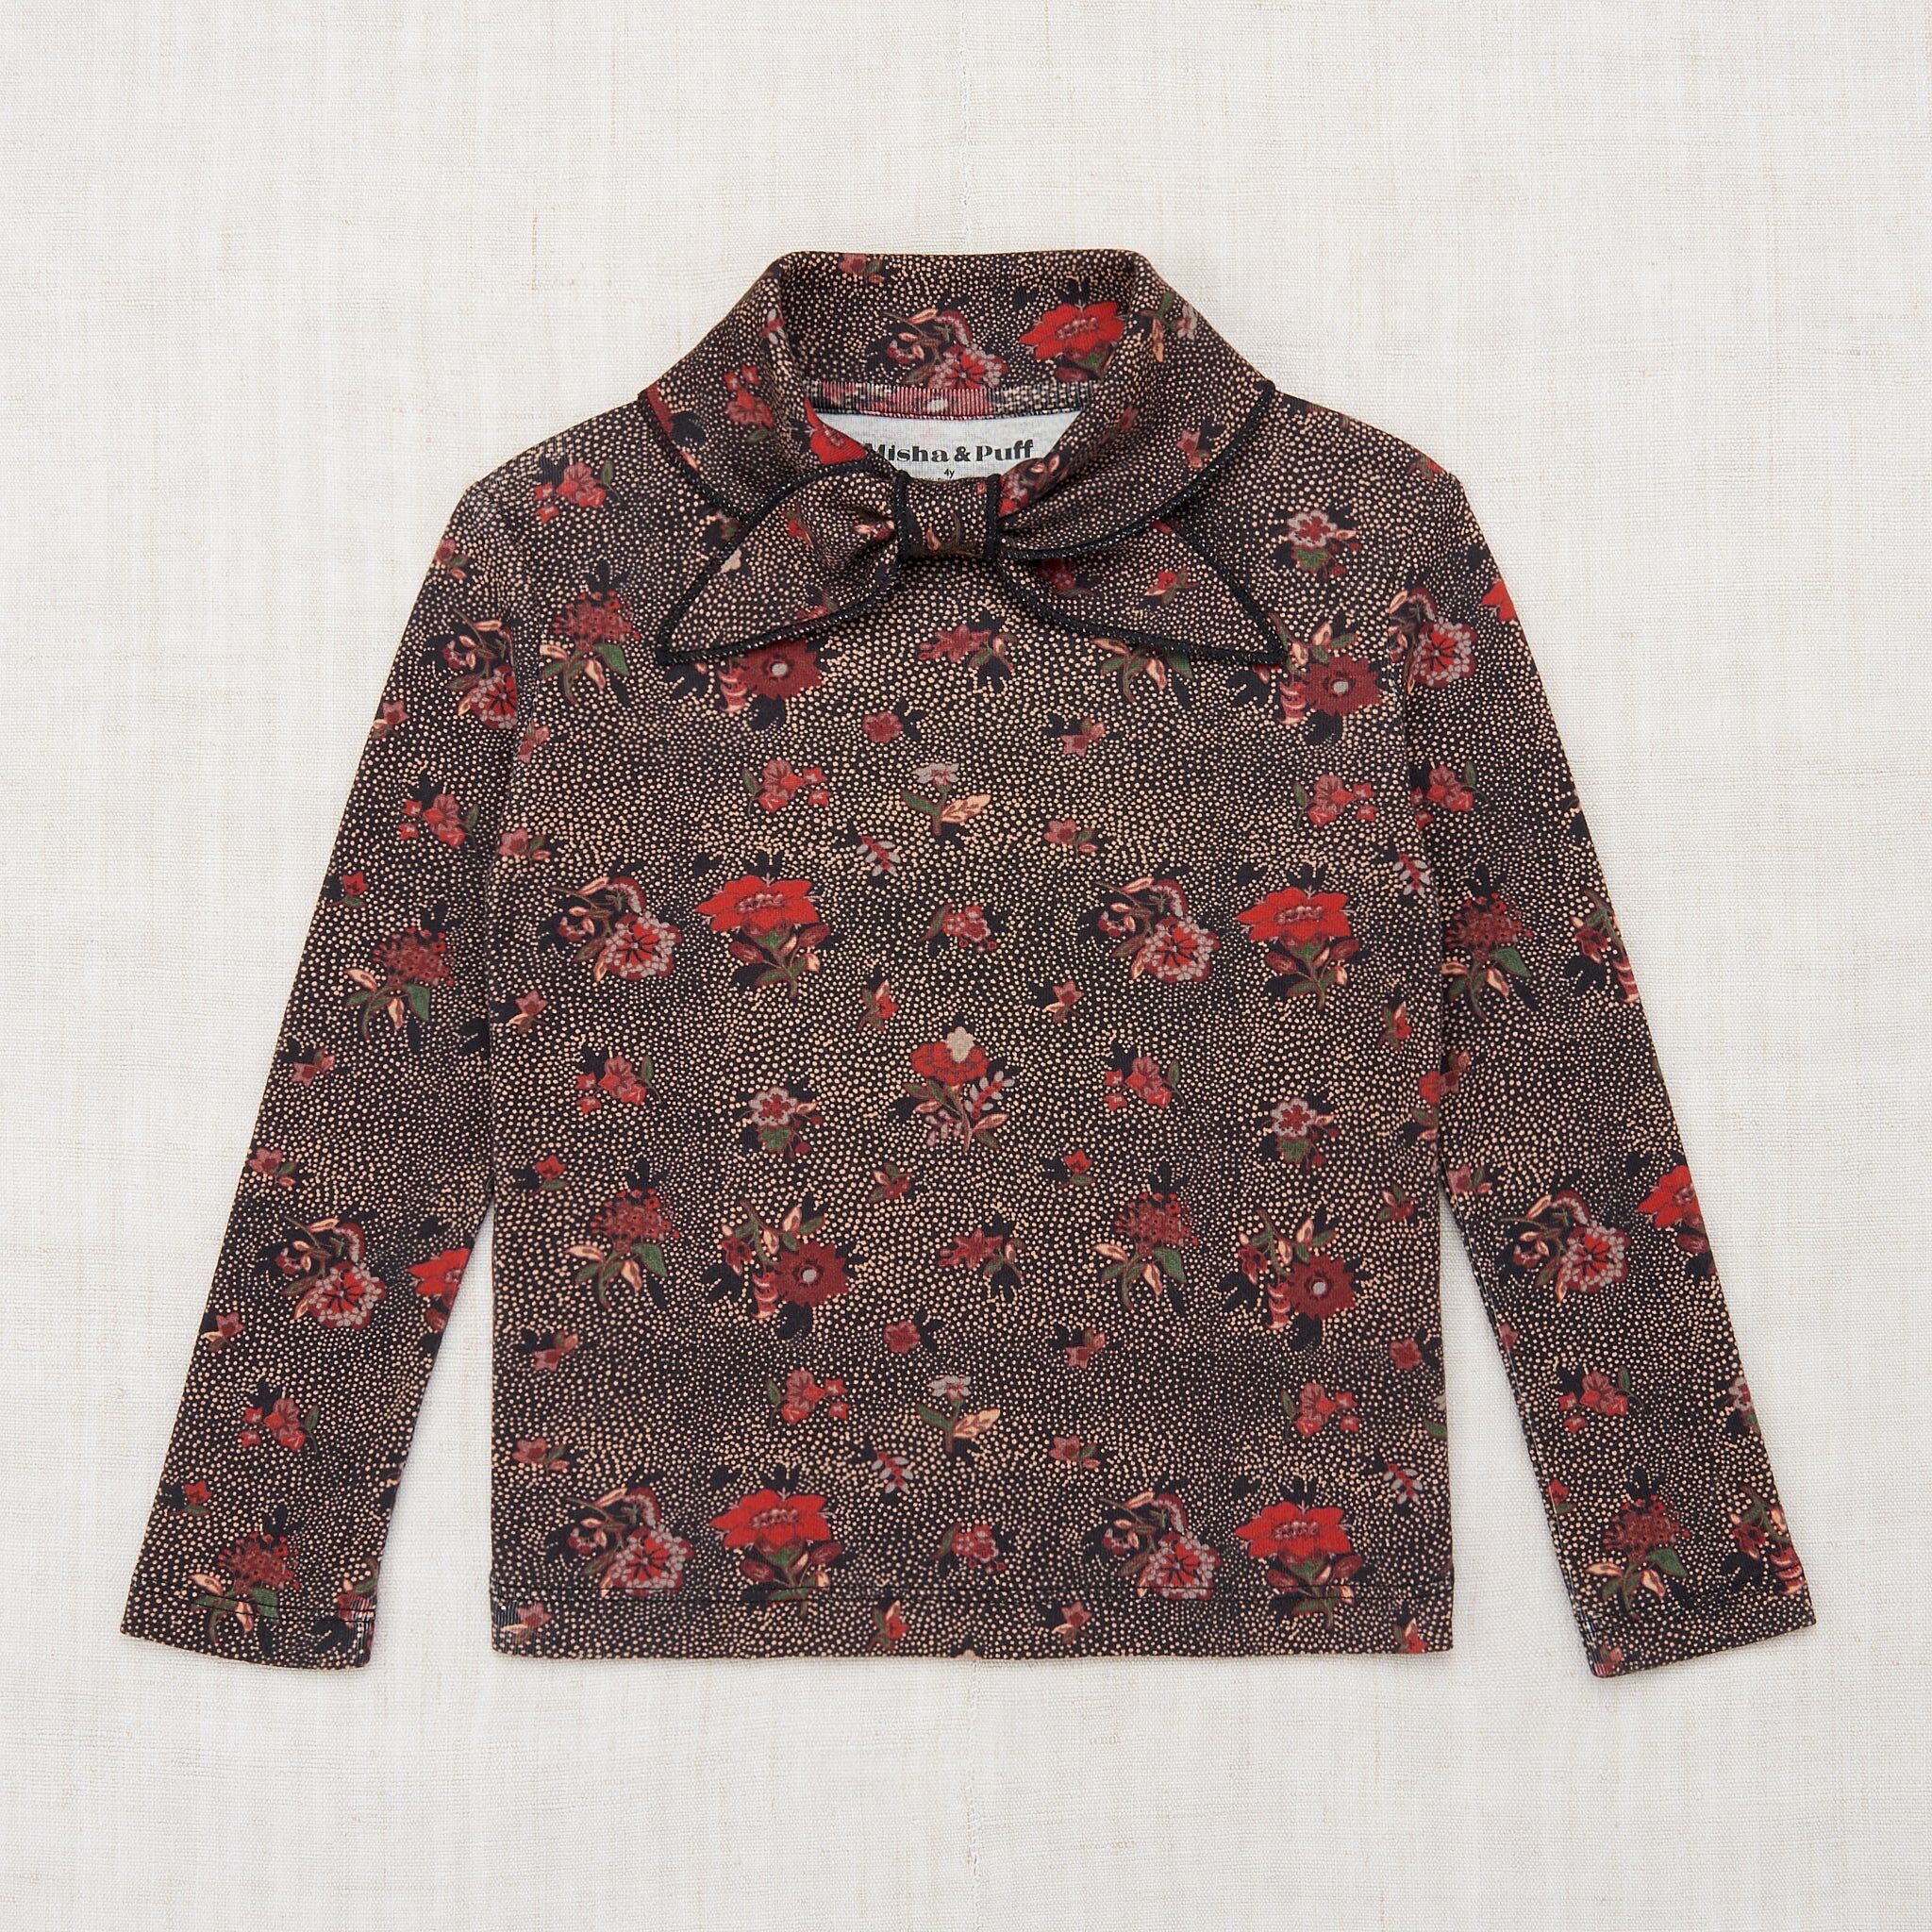 Misha & Puff - Scout Top - Licorice Holyoke Floral